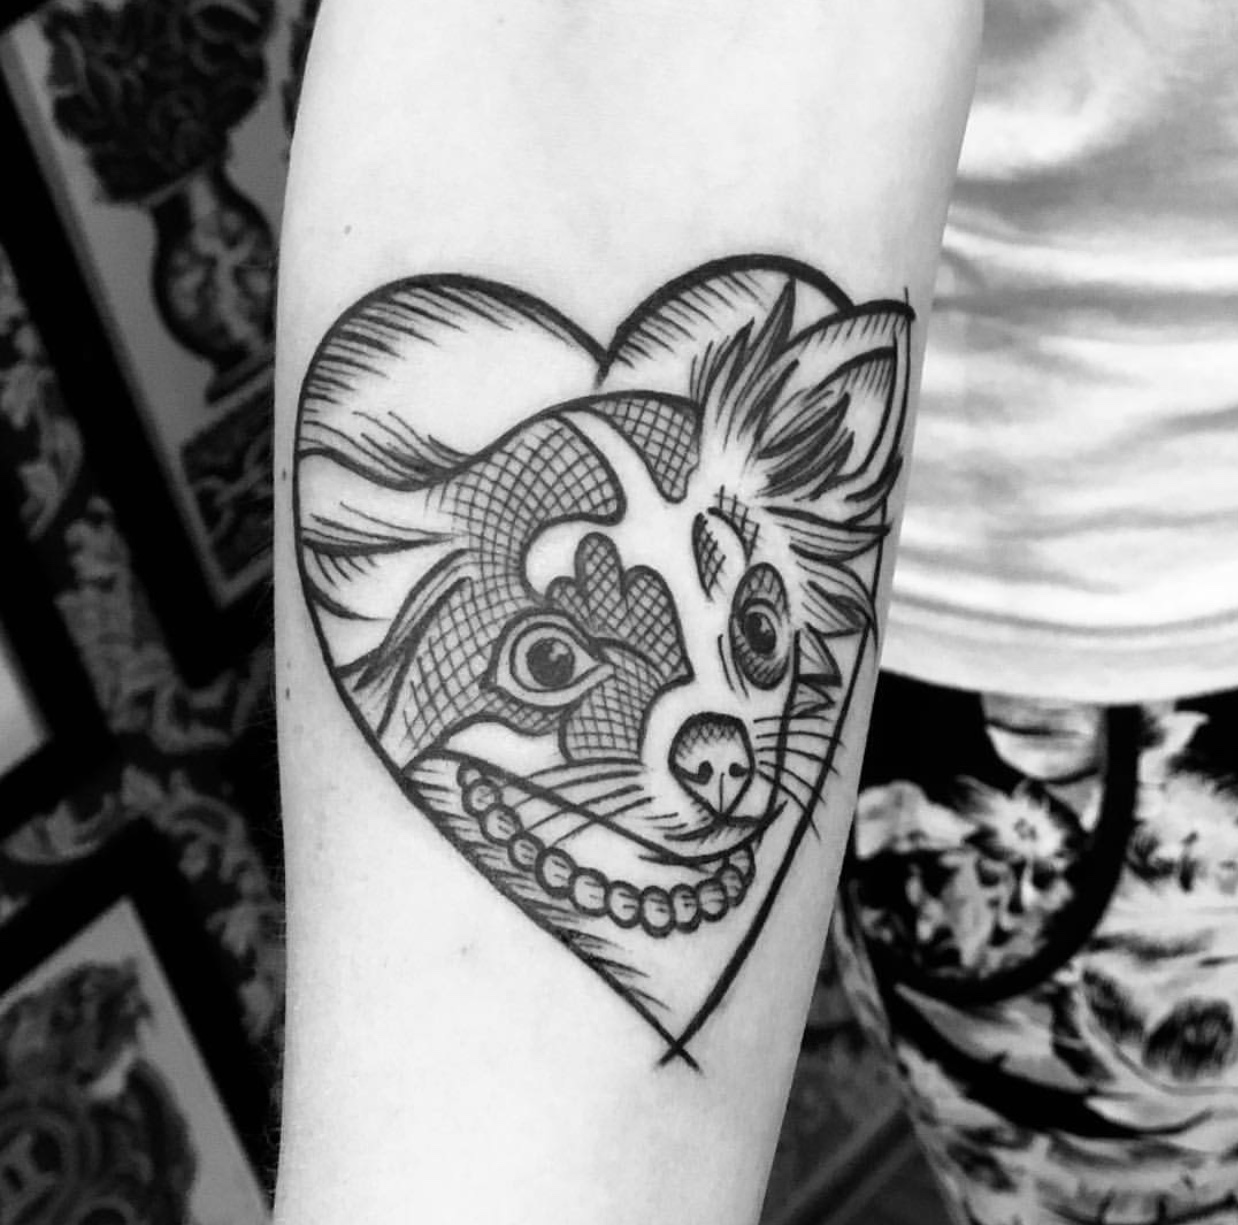 animated face of Chihuahua inside a hear tattoo on the forearm